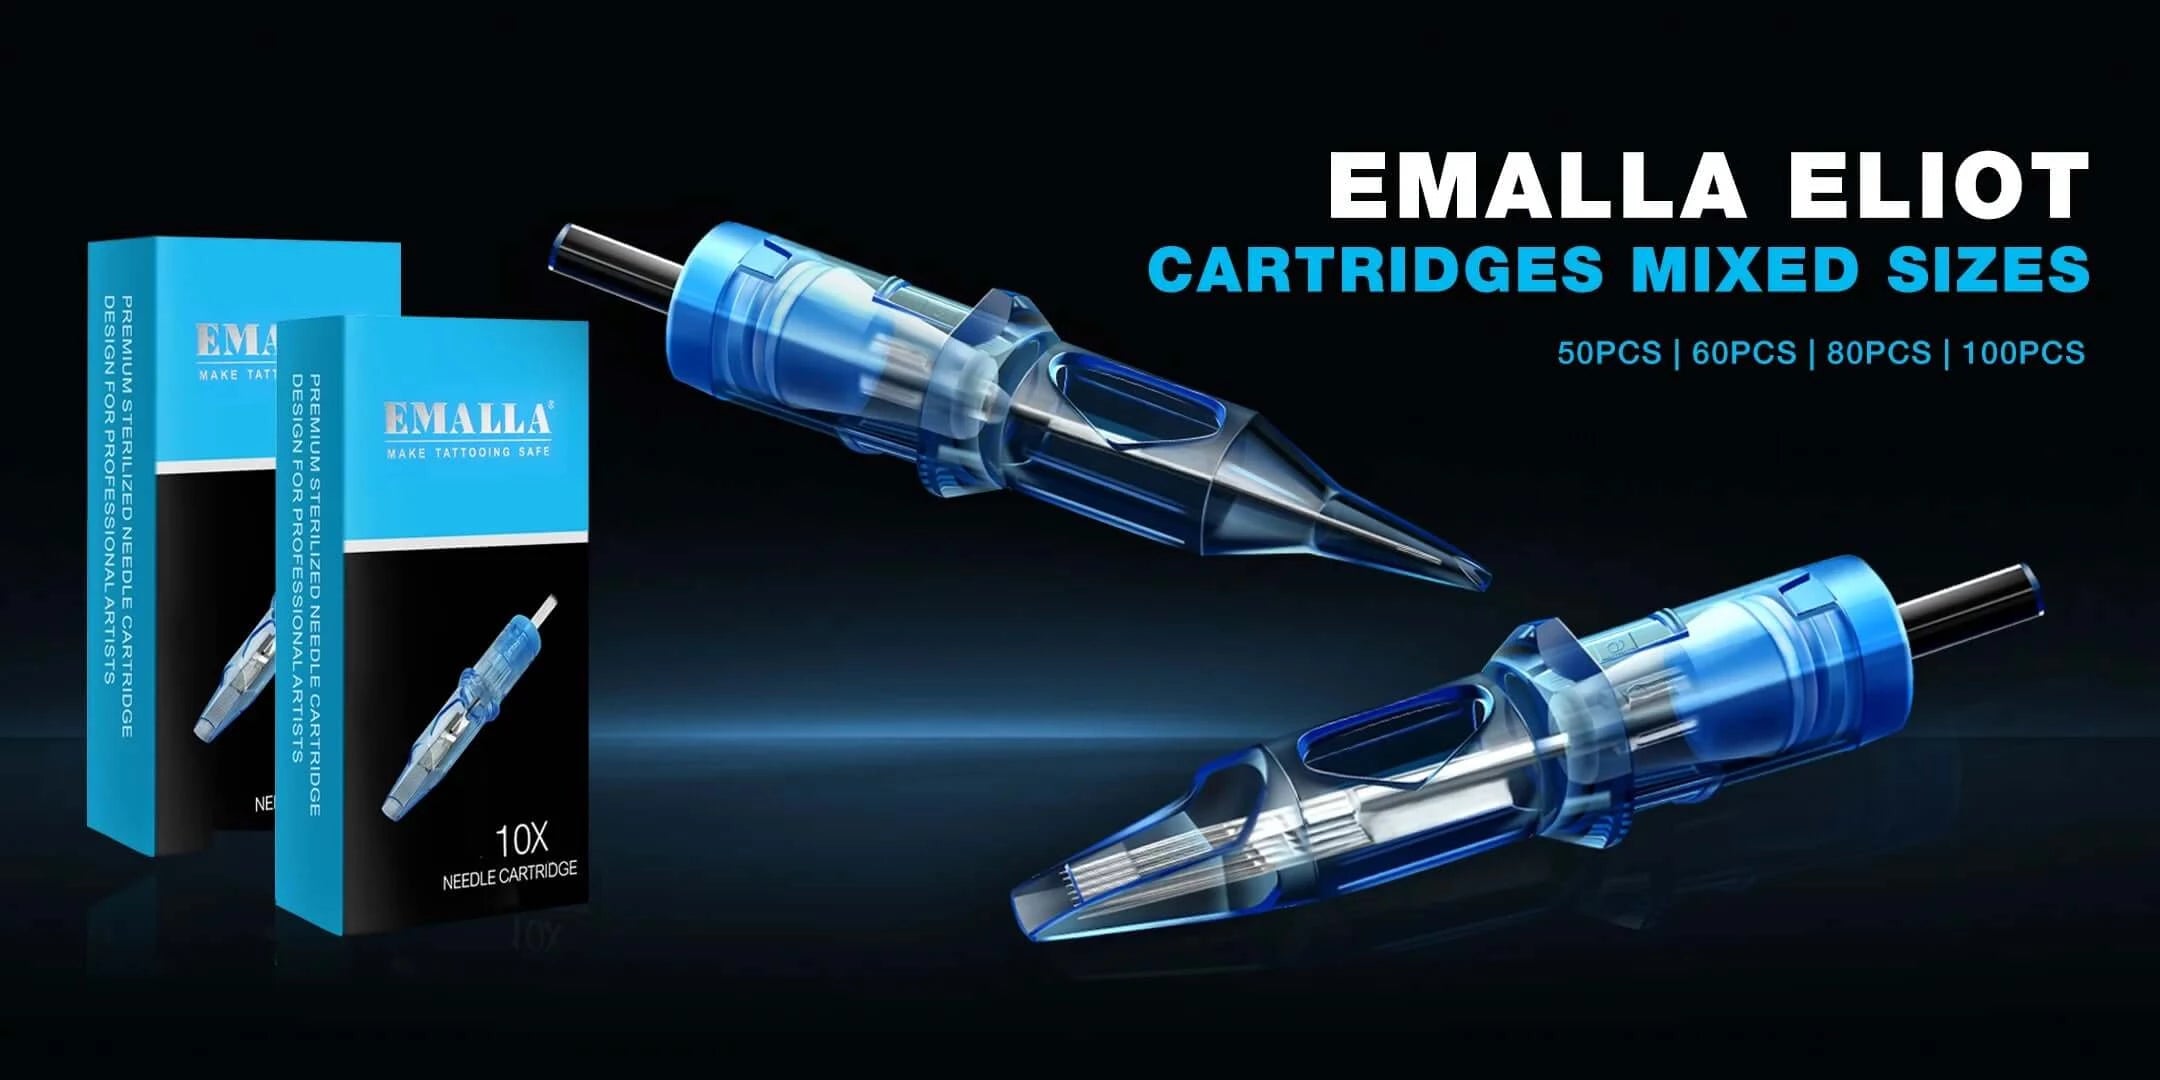 Emalla Eliot Mixed Sizes Cartridge Needles on sale on Emalla Official Website now